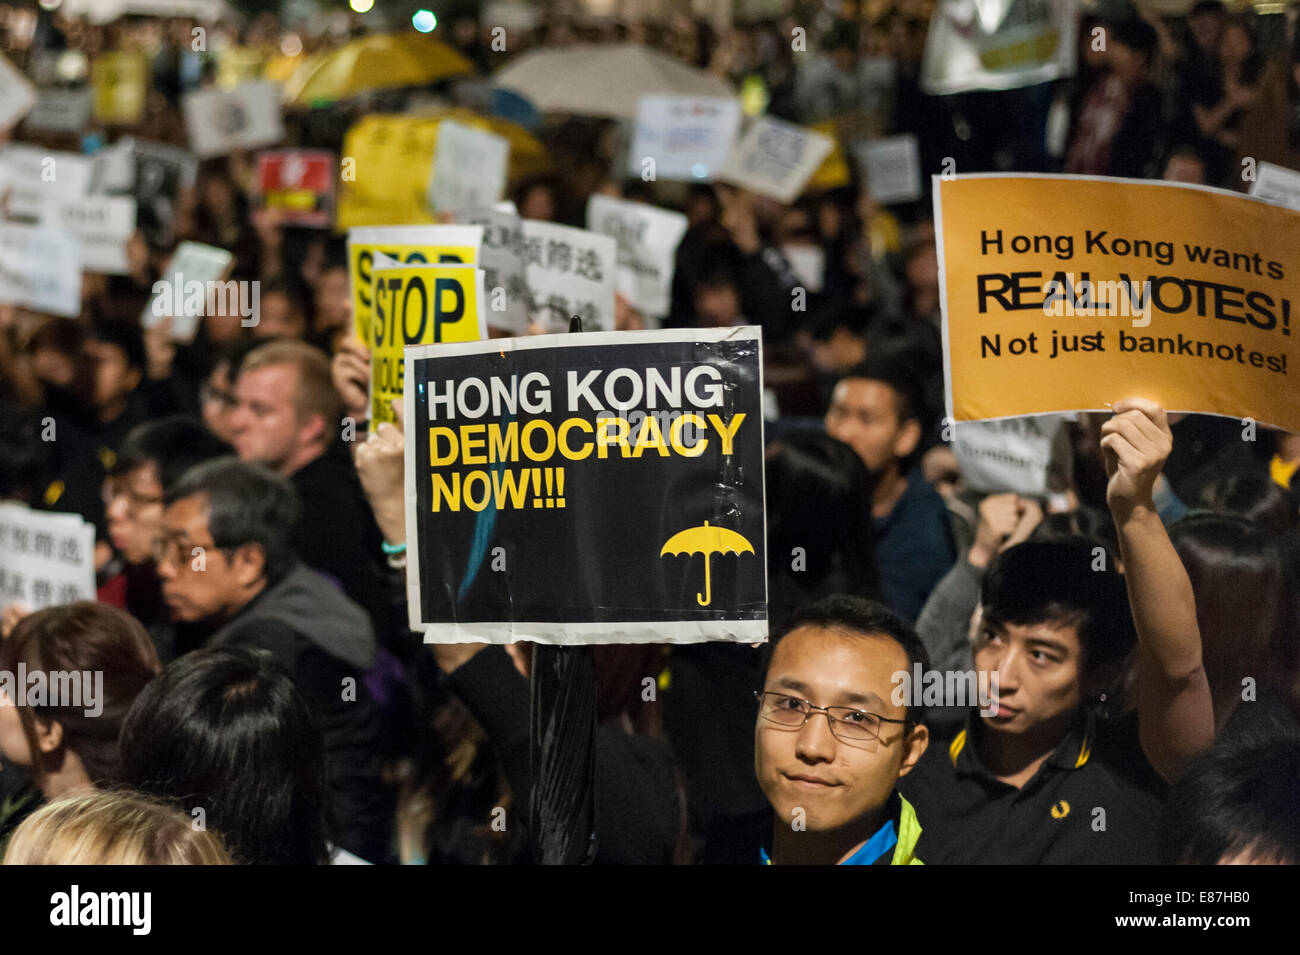 London, UK, 1 October 2014.  Nearly 3,000 people gathered outside the Chinese Embassy in London to support pro-democracy protesters in Hong Kong with many carrying umbrellas or wearing a yellow ribbon, the symbol of protests in the former British colony.  Credit:  Stephen Chung/Alamy Live News Stock Photo